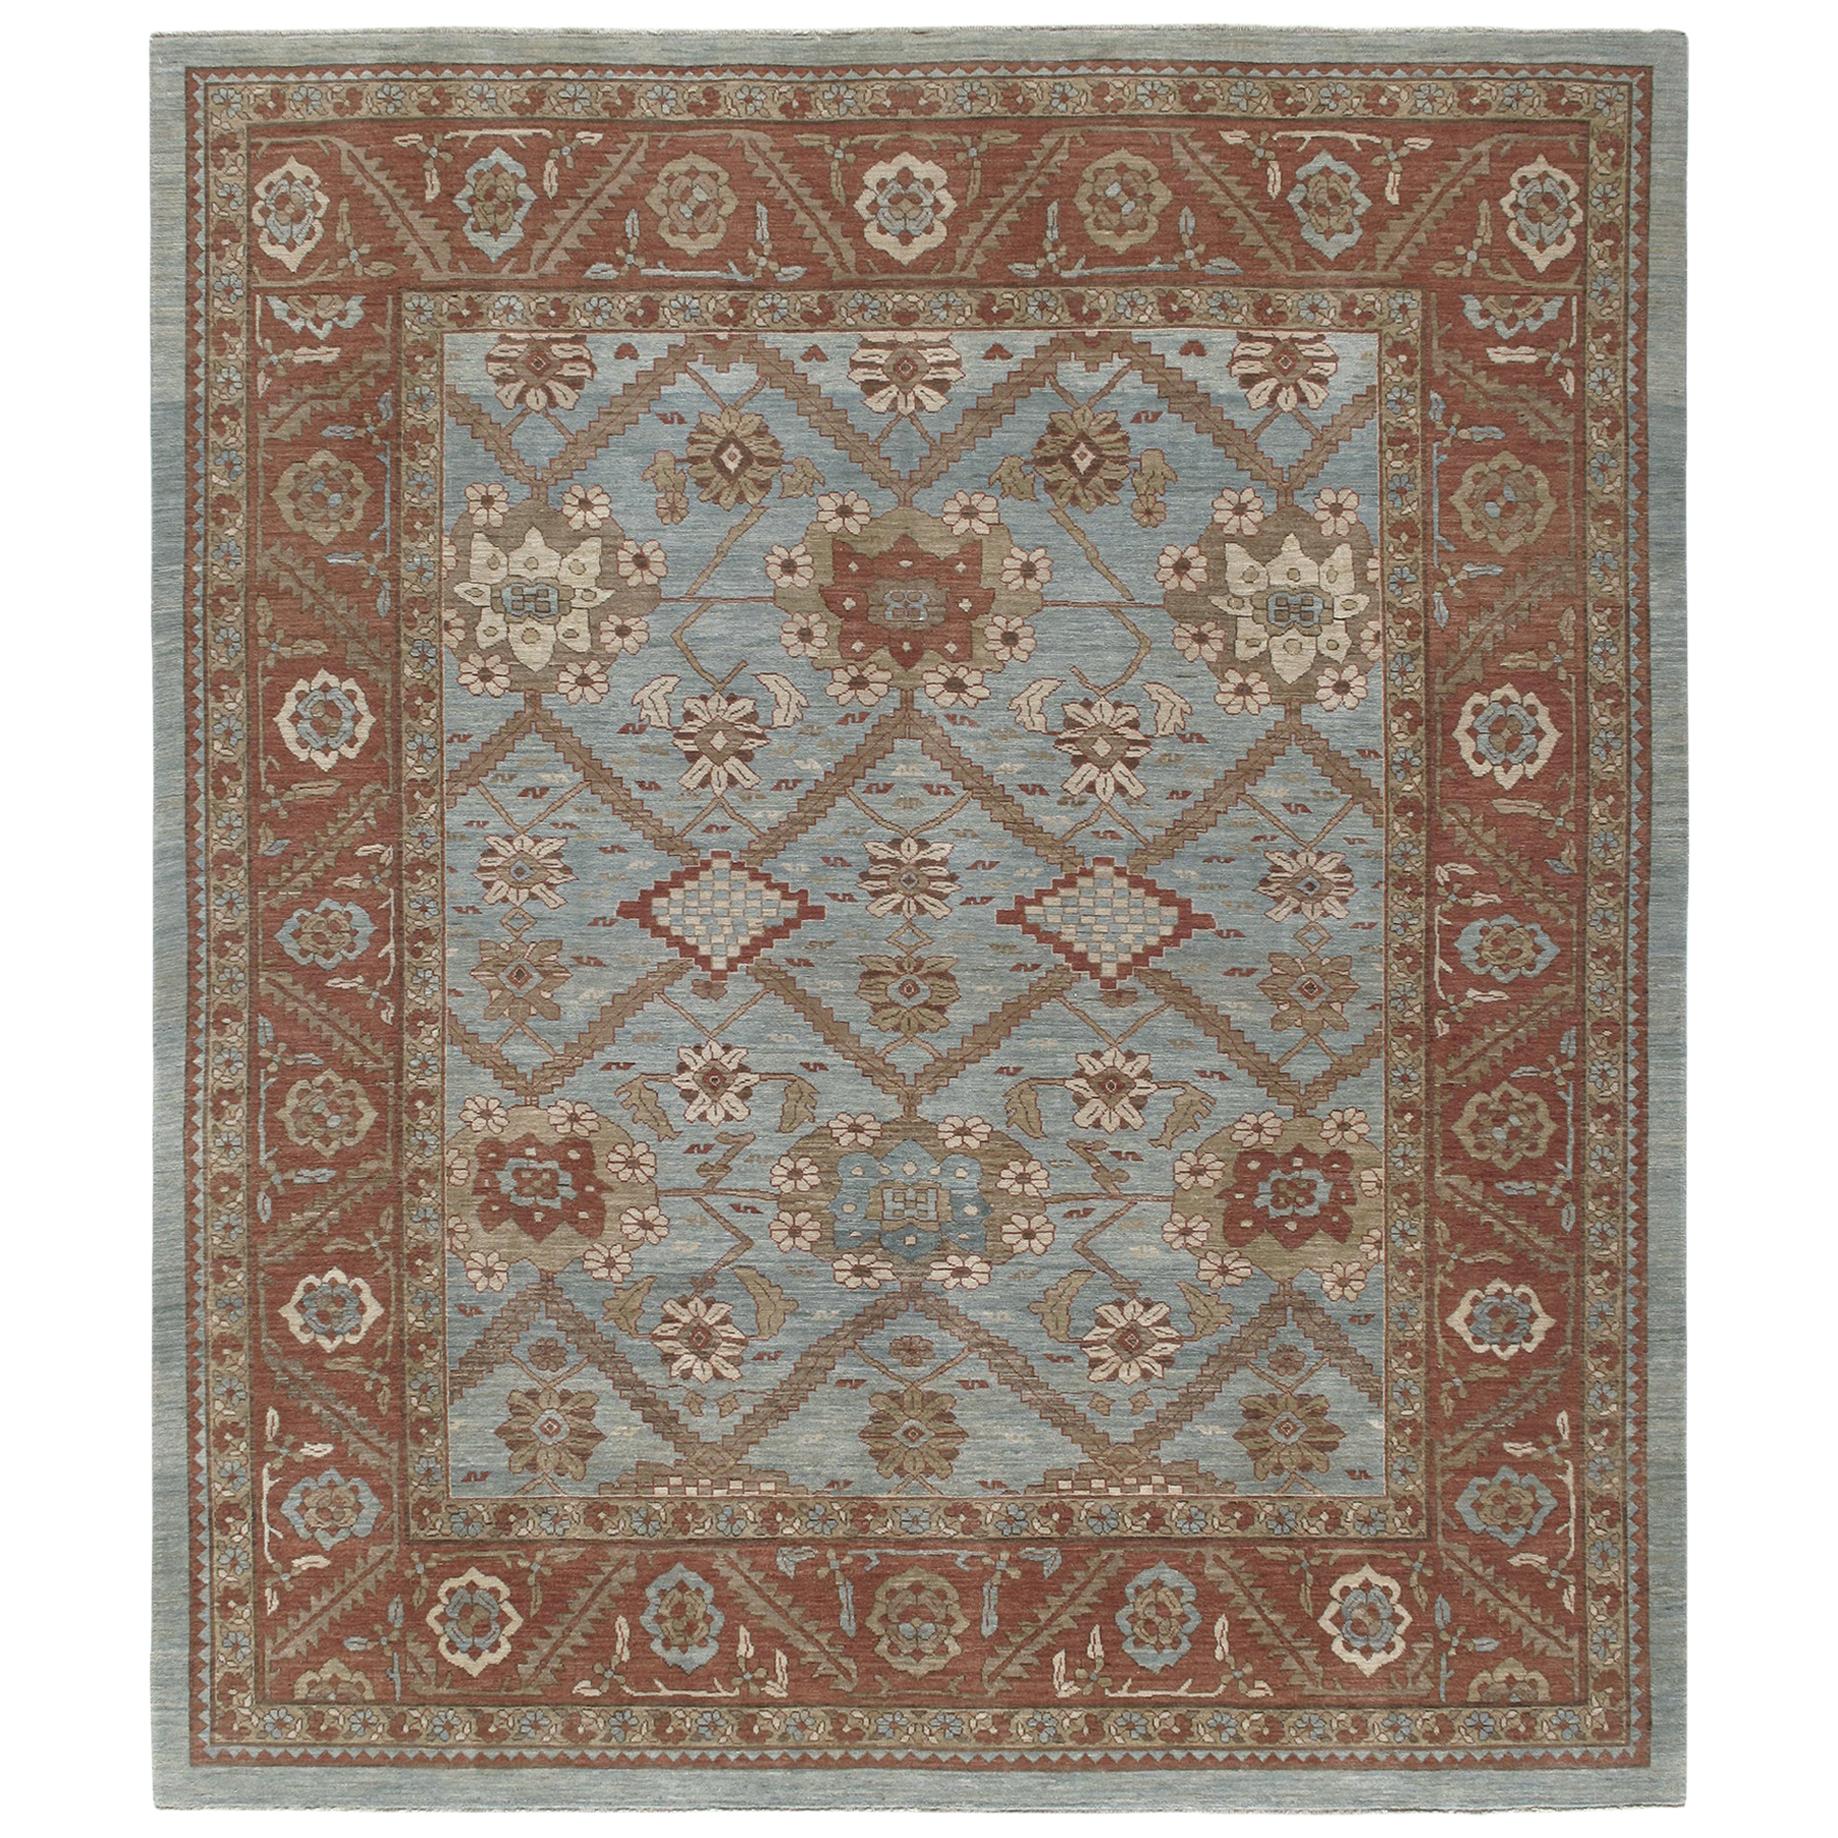 Persian Traditional Bakshaish Handknotted Rug in Pale Blue and Rust Color.